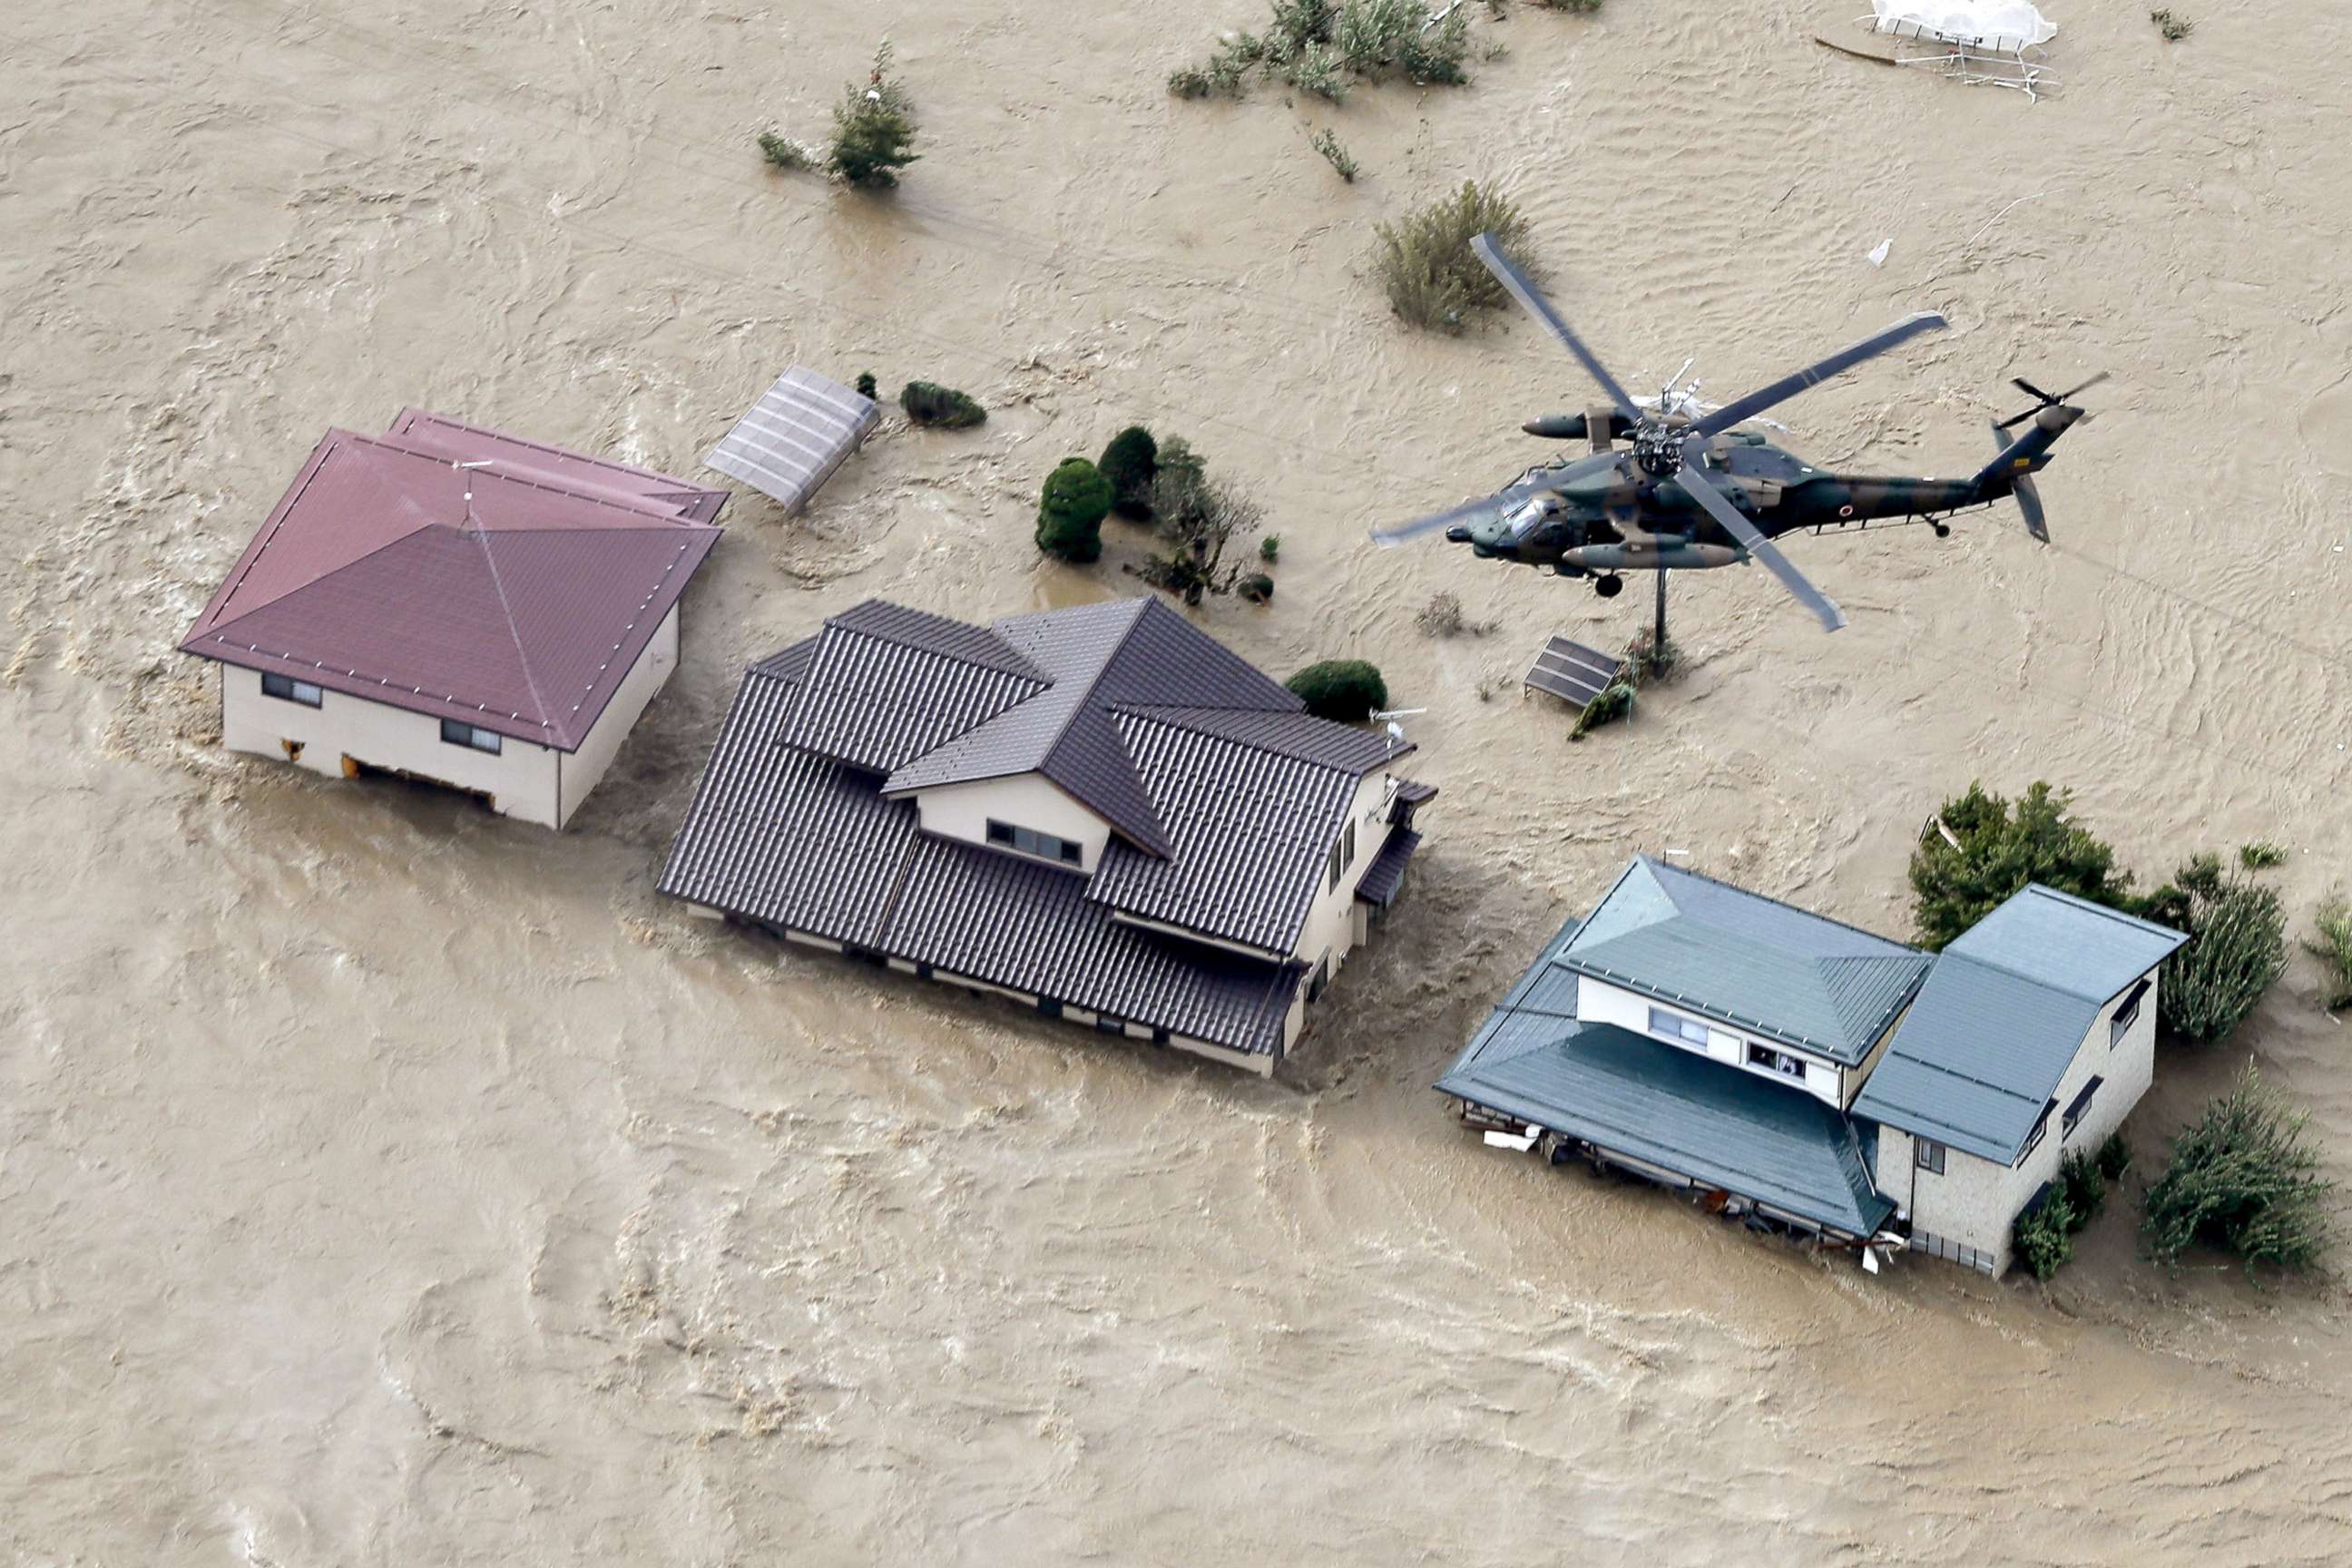 PHOTO: A photo taken from a Kyodo News helicopter, Oct. 13, 2019, shows houses in Nagano, central Japan, submerged after the Chikuma River overflowed due to Typhoon Hagibis.